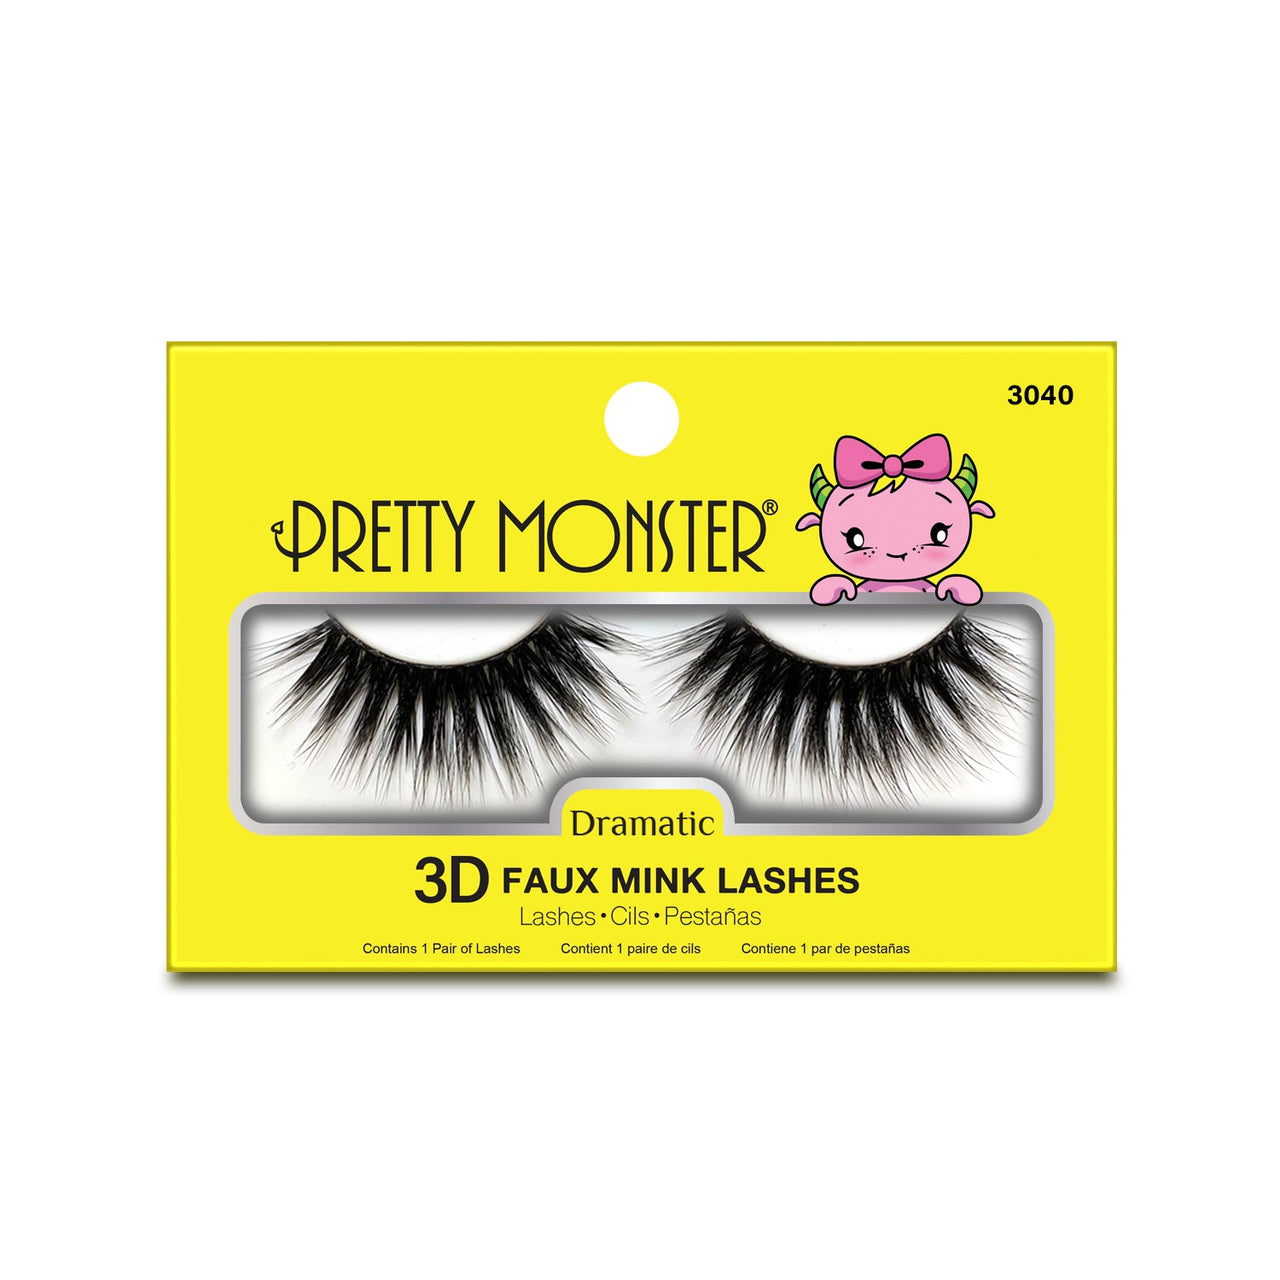 Pretty Monster Dramatic 3D Faux Mink Lashes